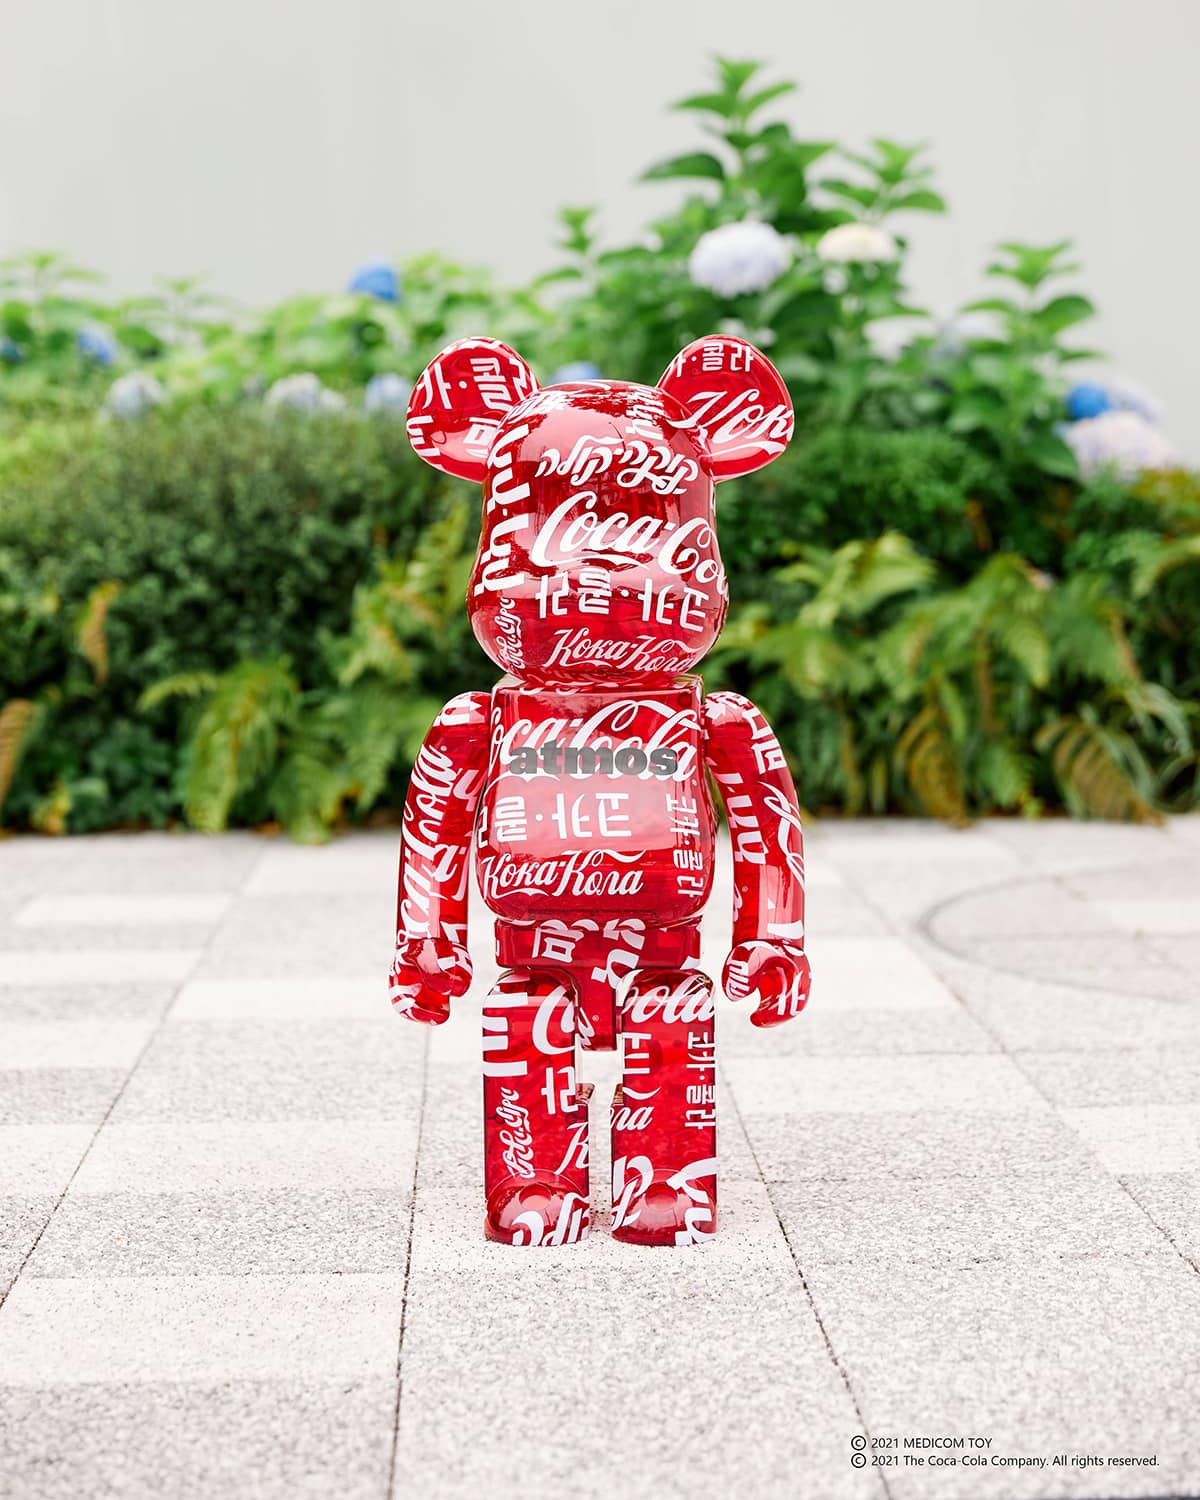 2021.2.19 MEDICOM TOY BE@RBRICK atmos × Coca-Cola 1000％ CLEAR RED